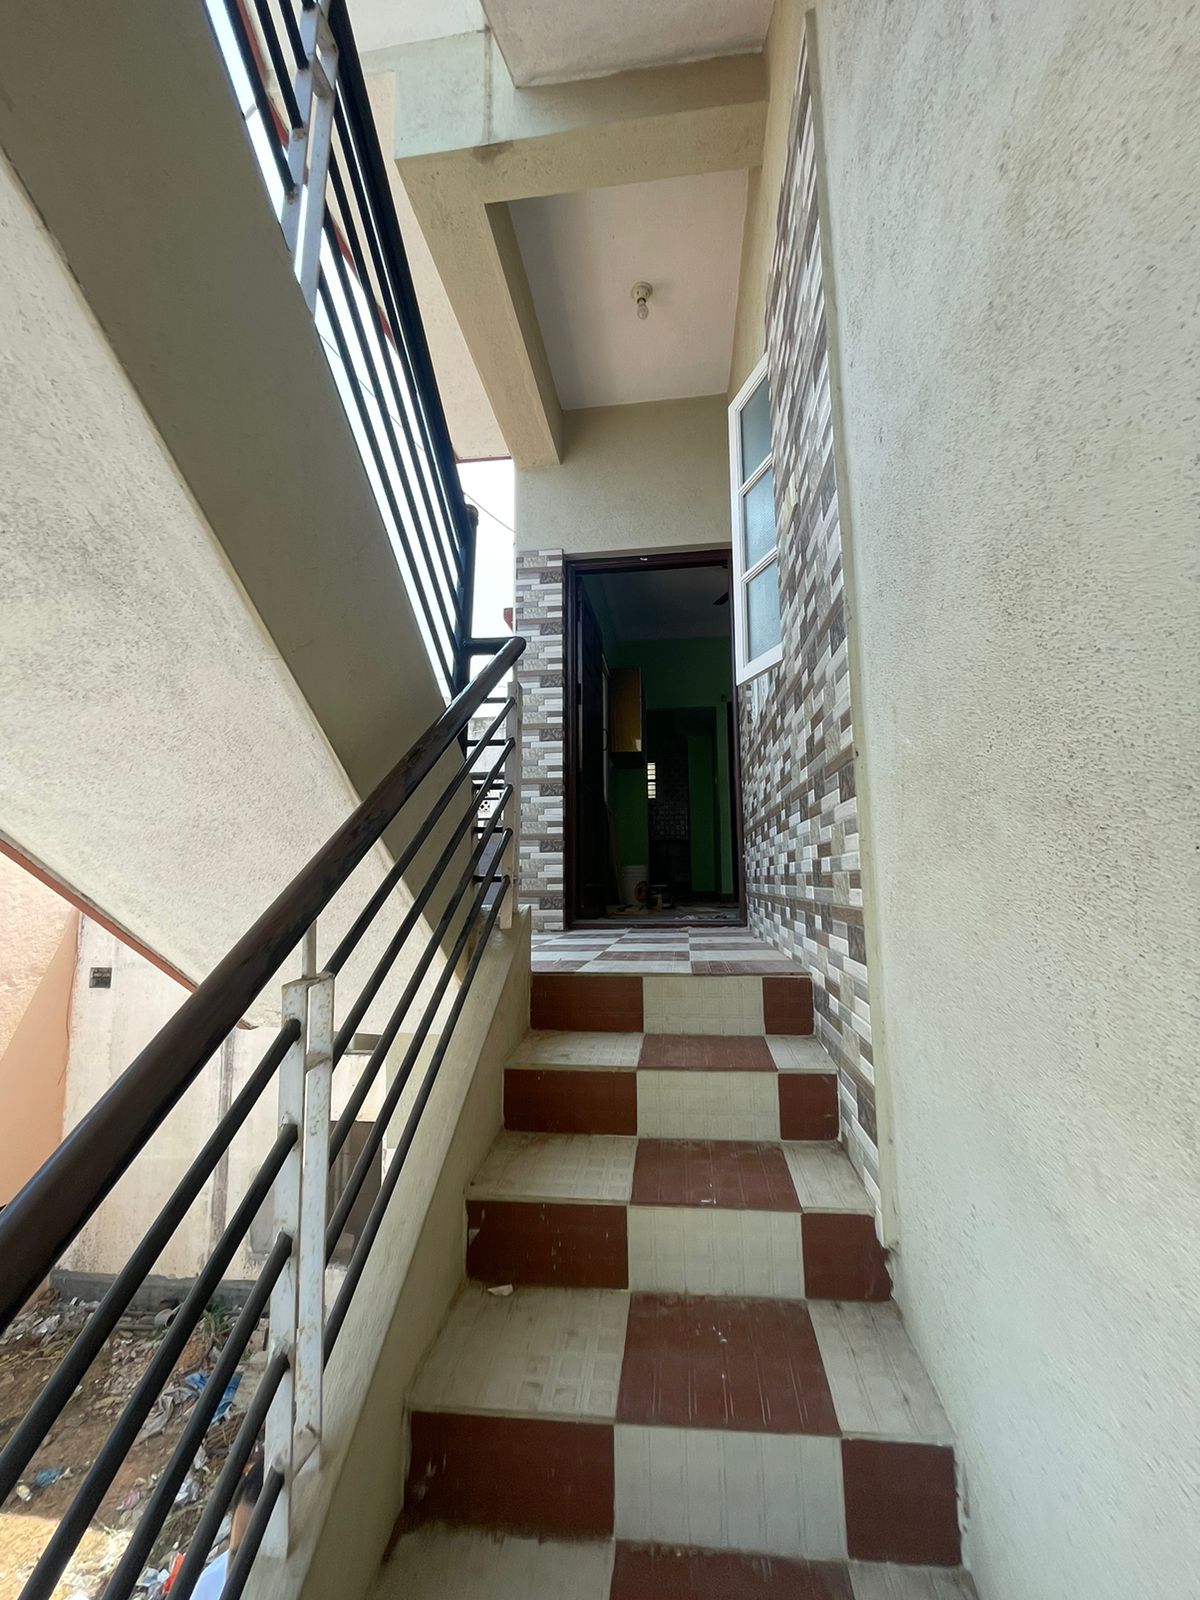 2 BHK Independent House for Lease Only at JAML2 - 840 in M.S. Ramaiah Nagar